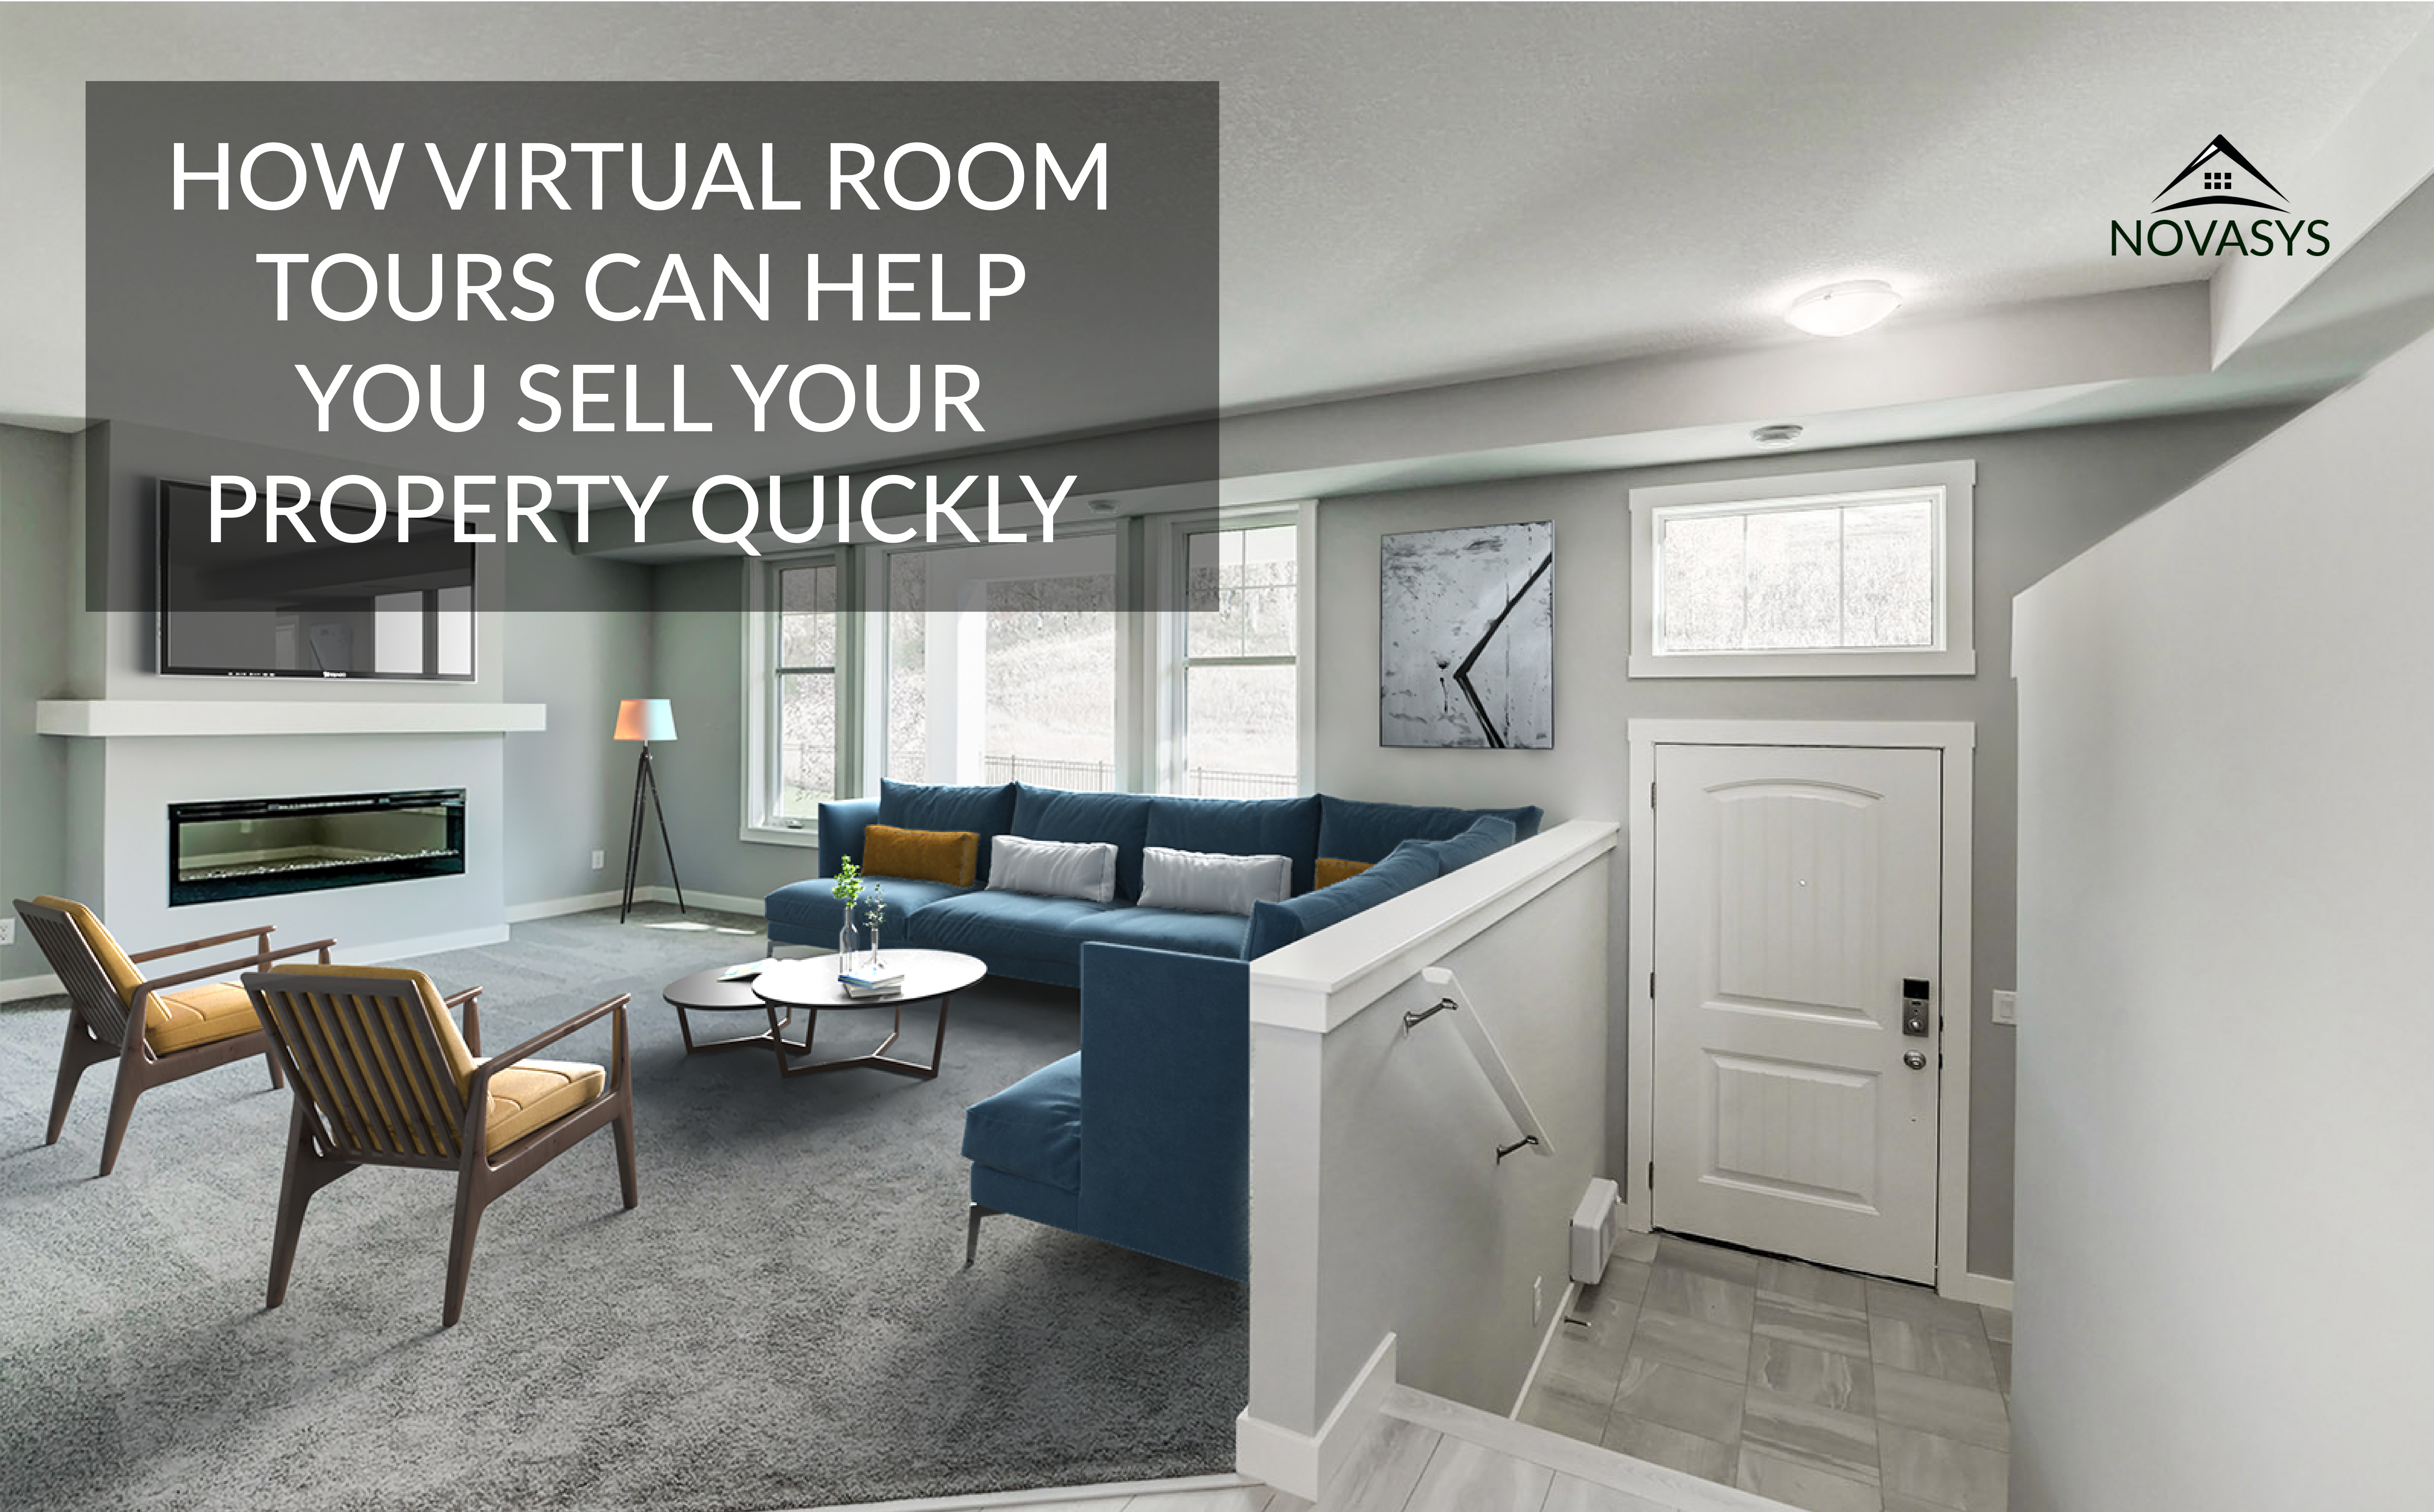 How Virtual Room Tours Can Help You Sell Your Property Quickly